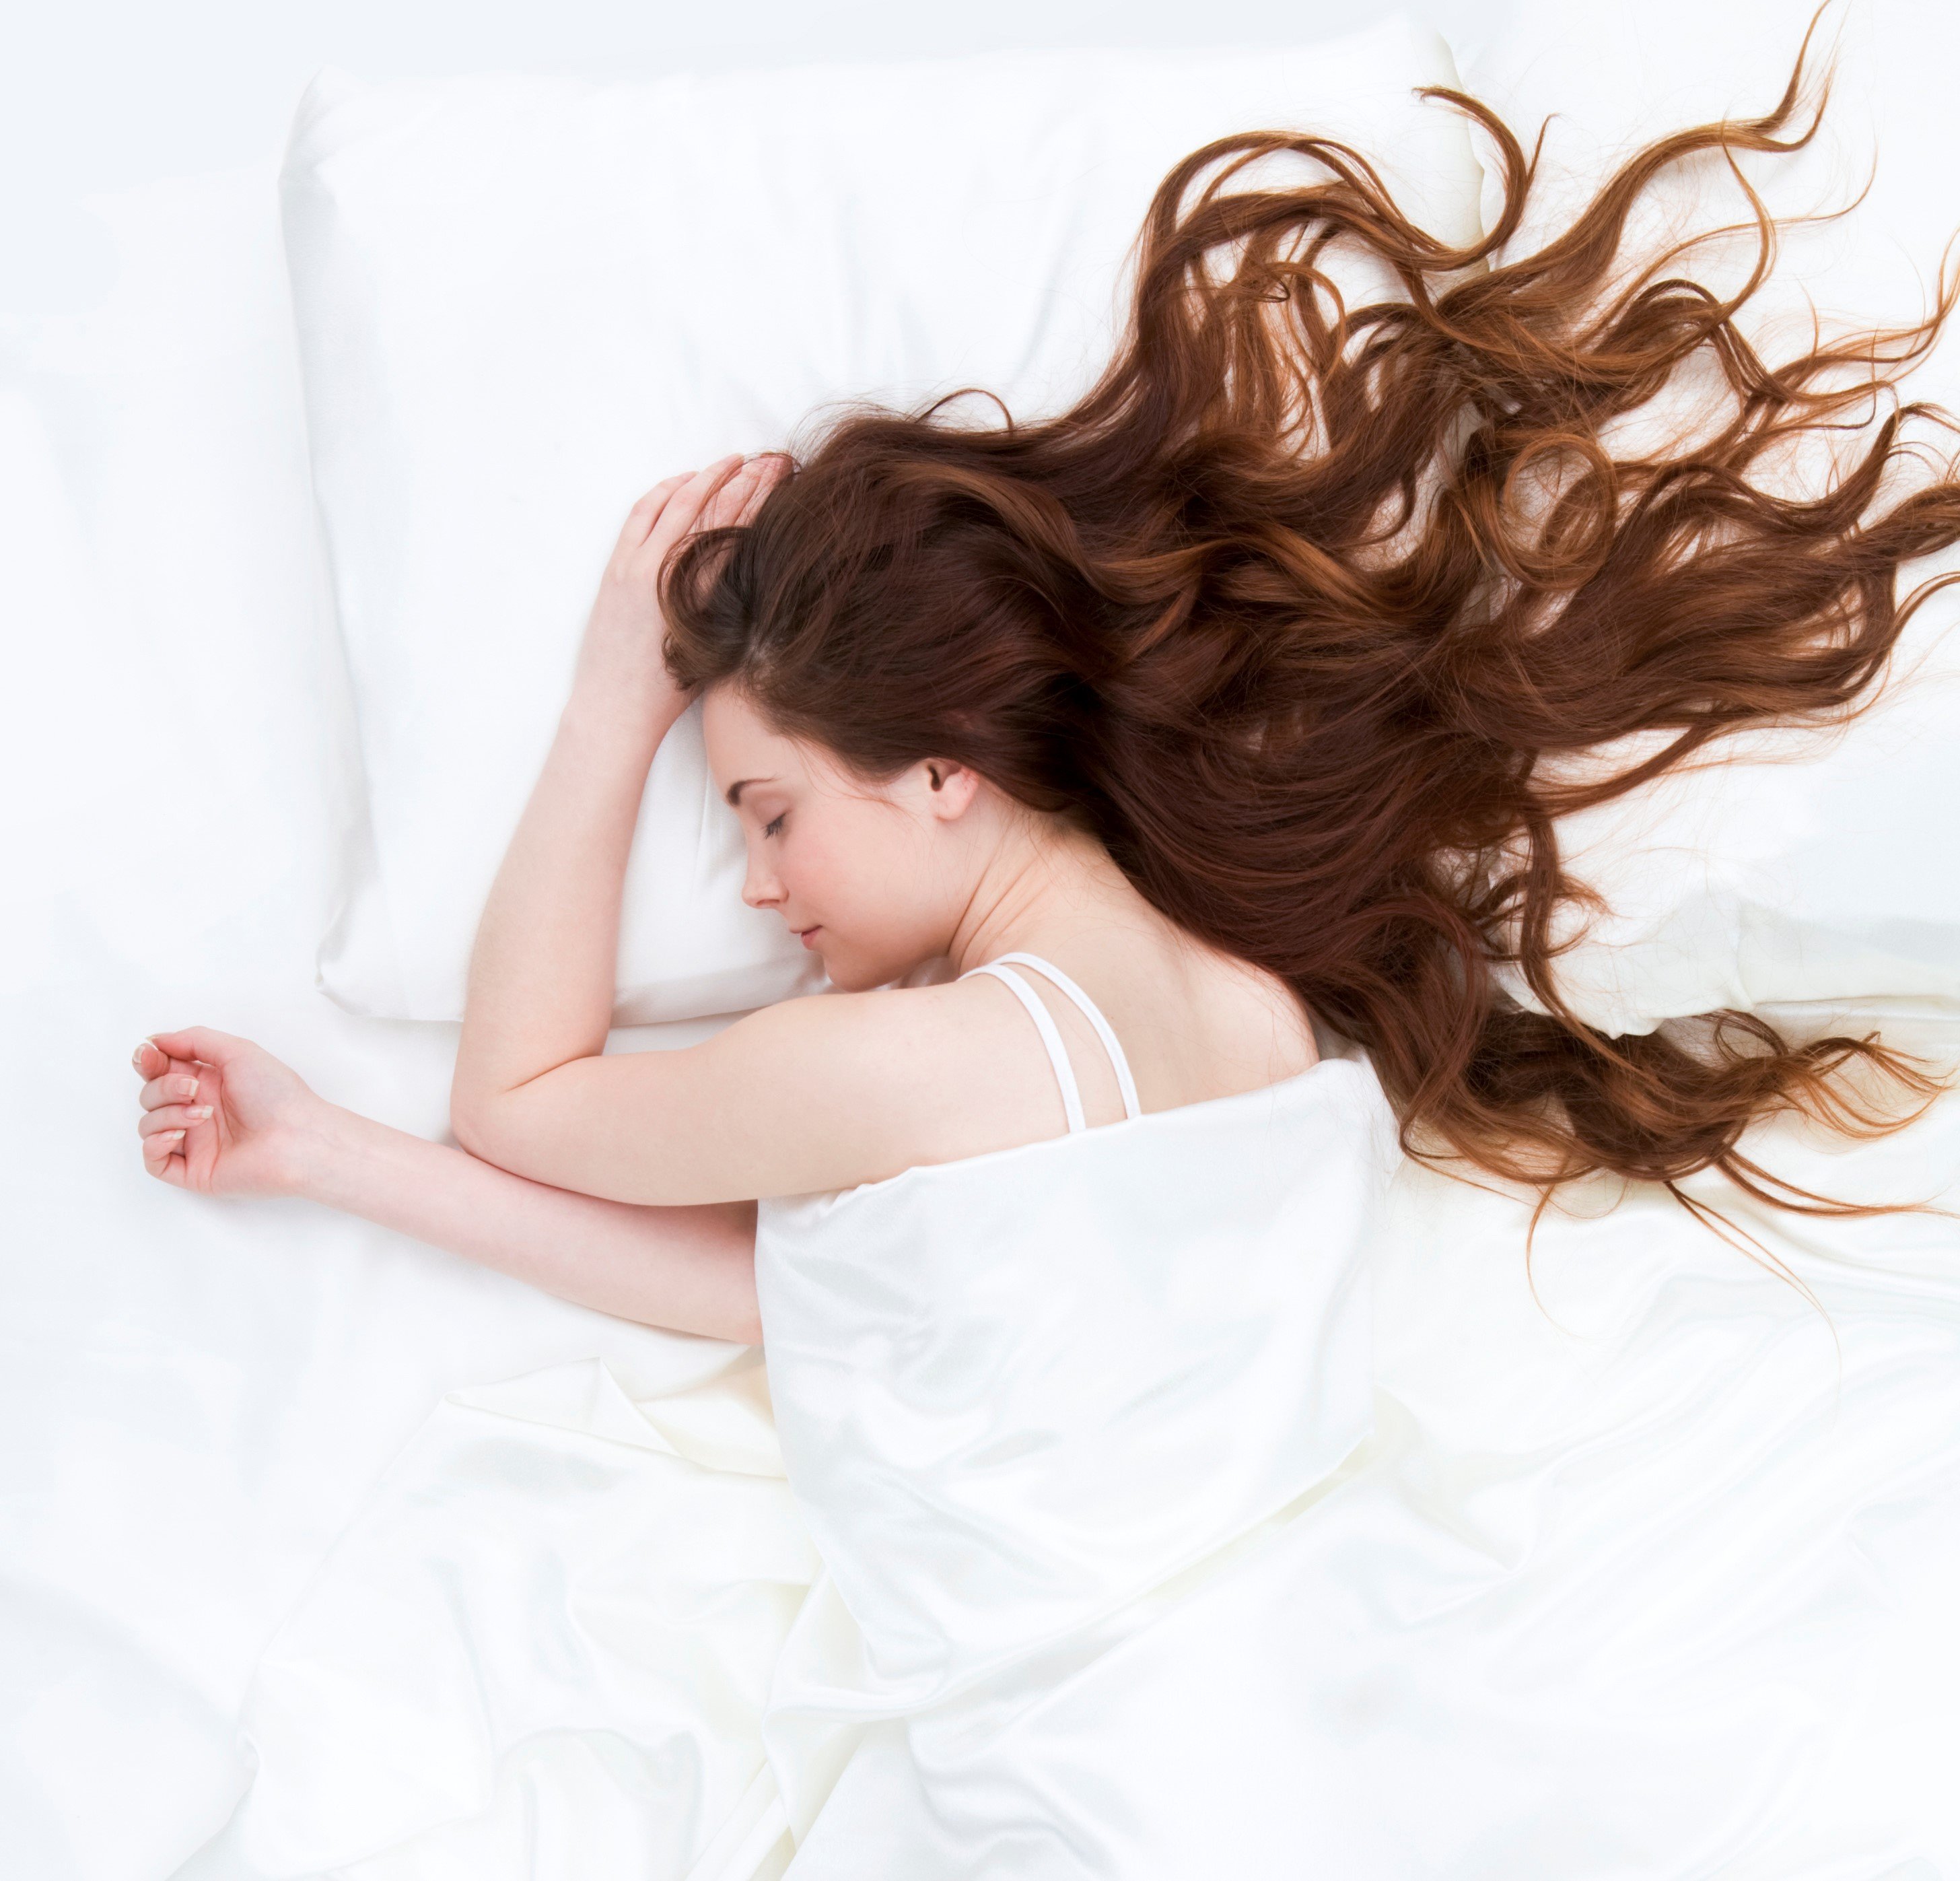 Woman sleeping on a satin sheets. | Source: Getty Images